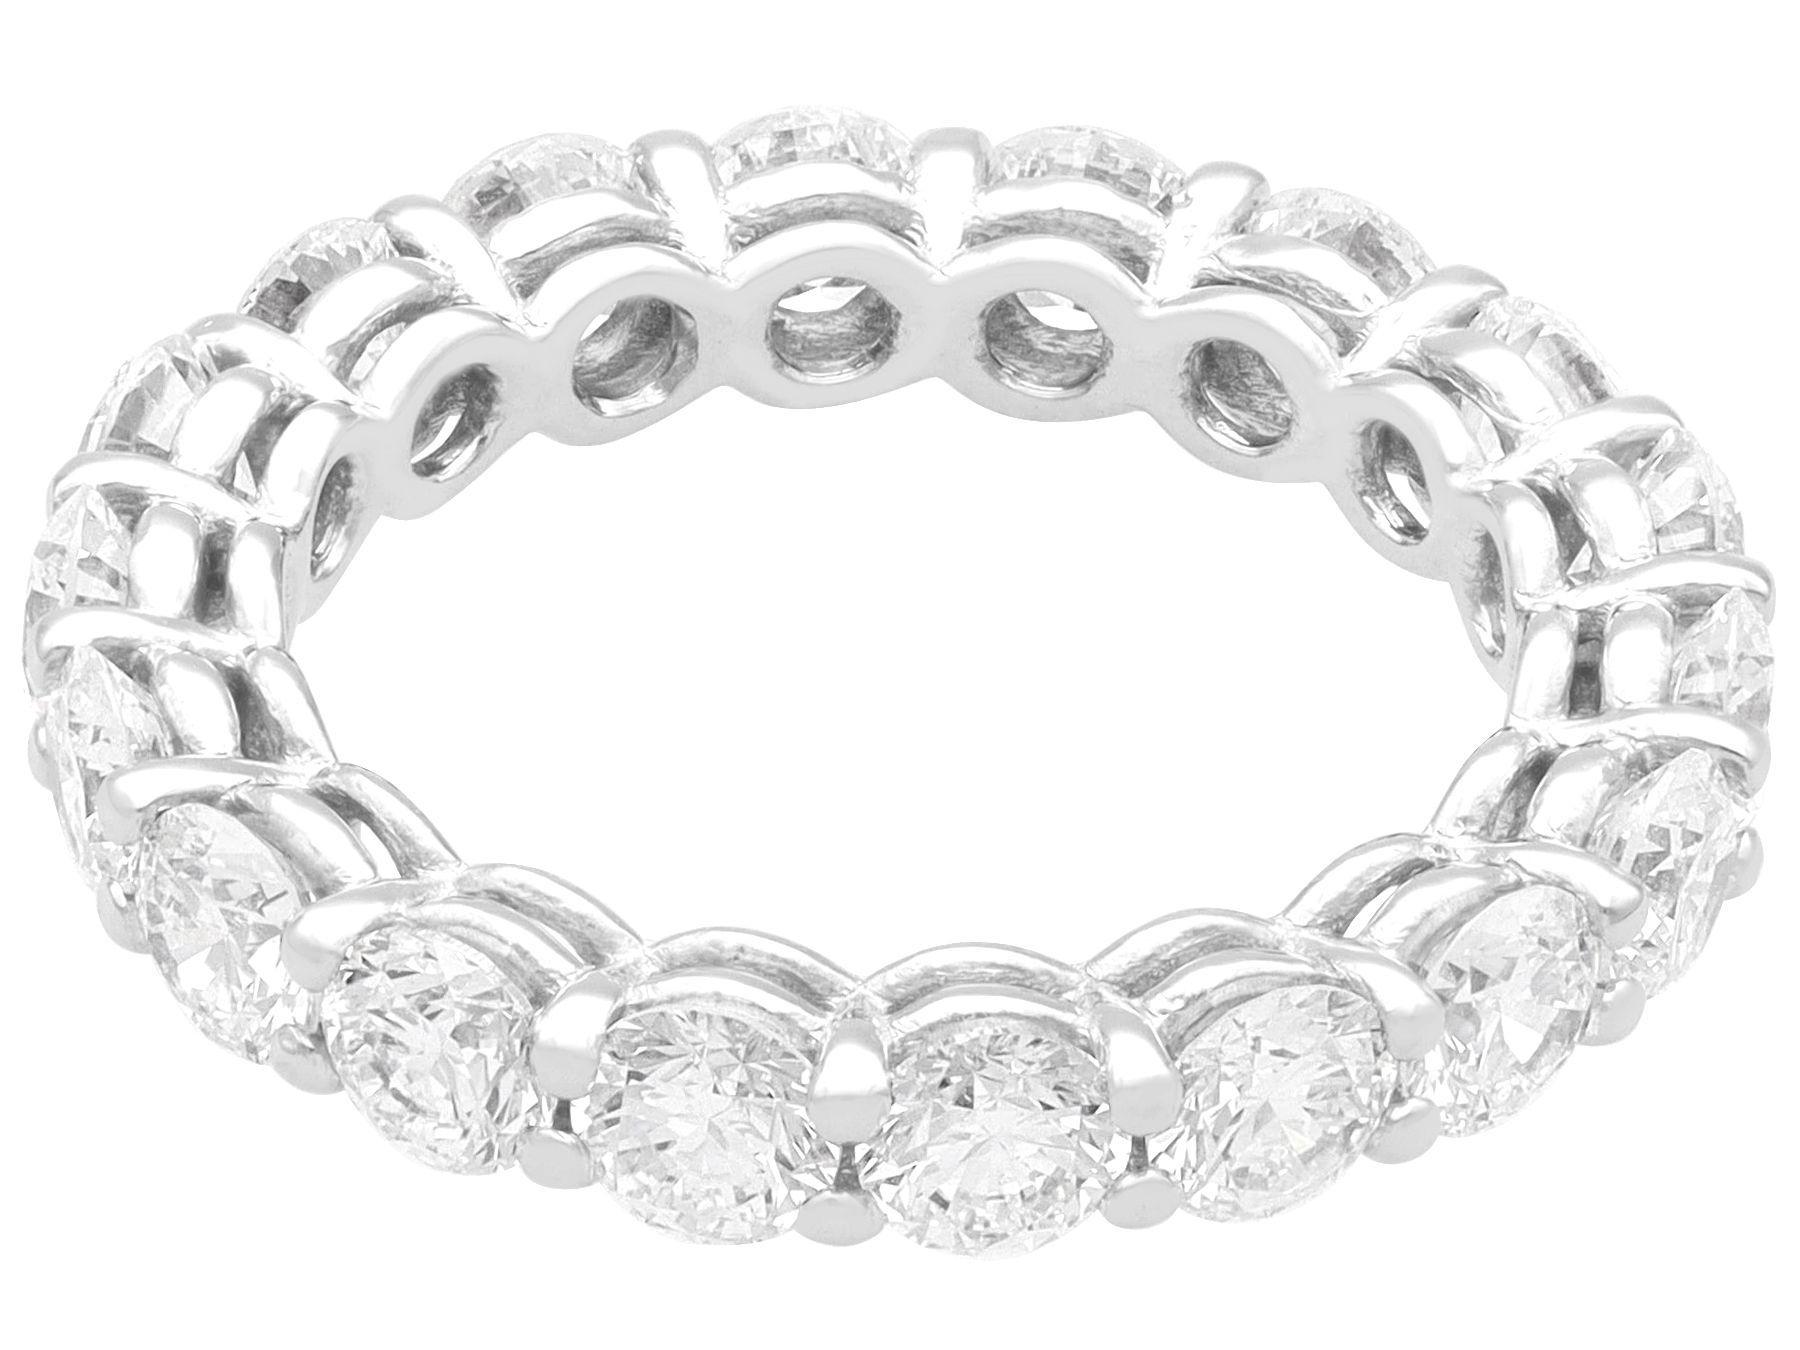 Vintage 2.77 Carat Diamond and Platinum Full Eternity Ring In Excellent Condition For Sale In Jesmond, Newcastle Upon Tyne